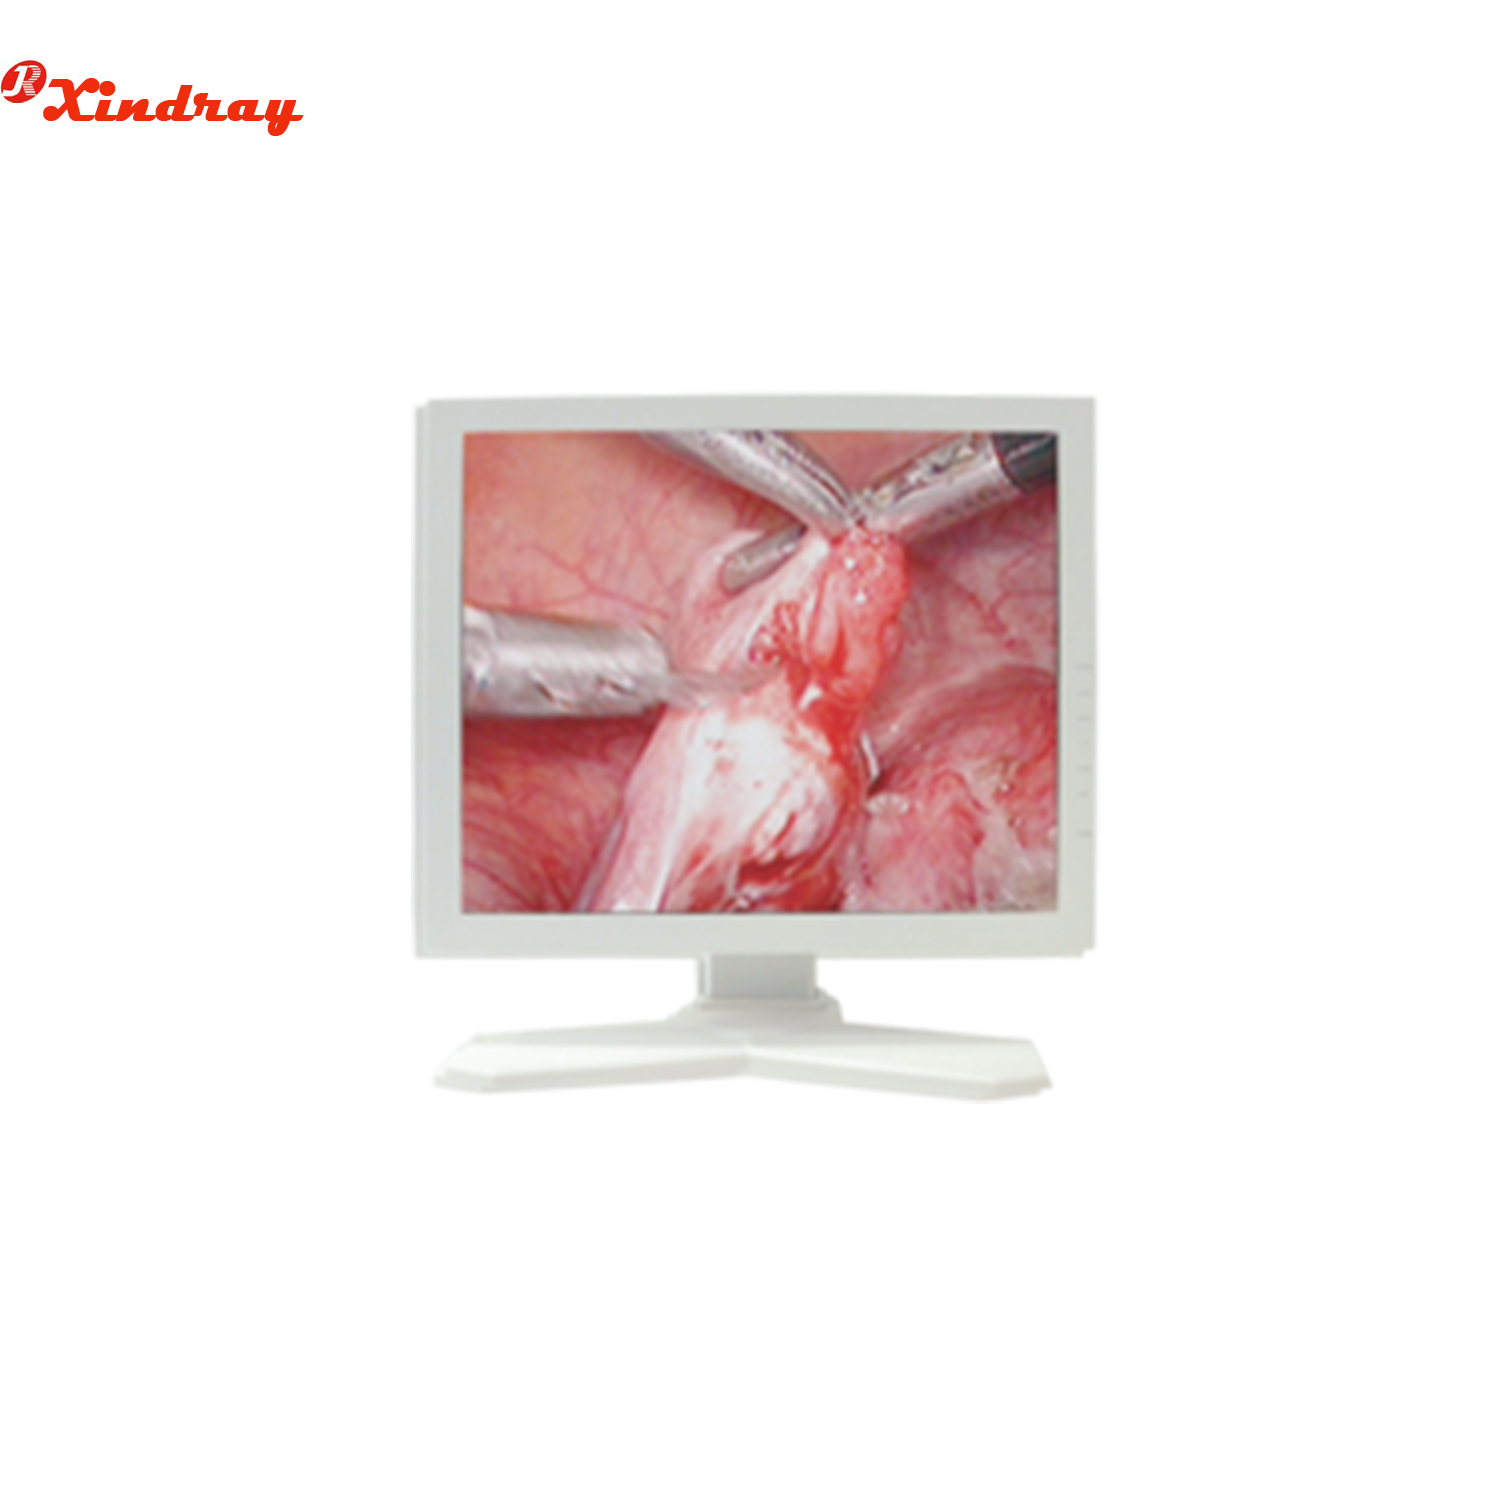 Monitor for Endoscope 